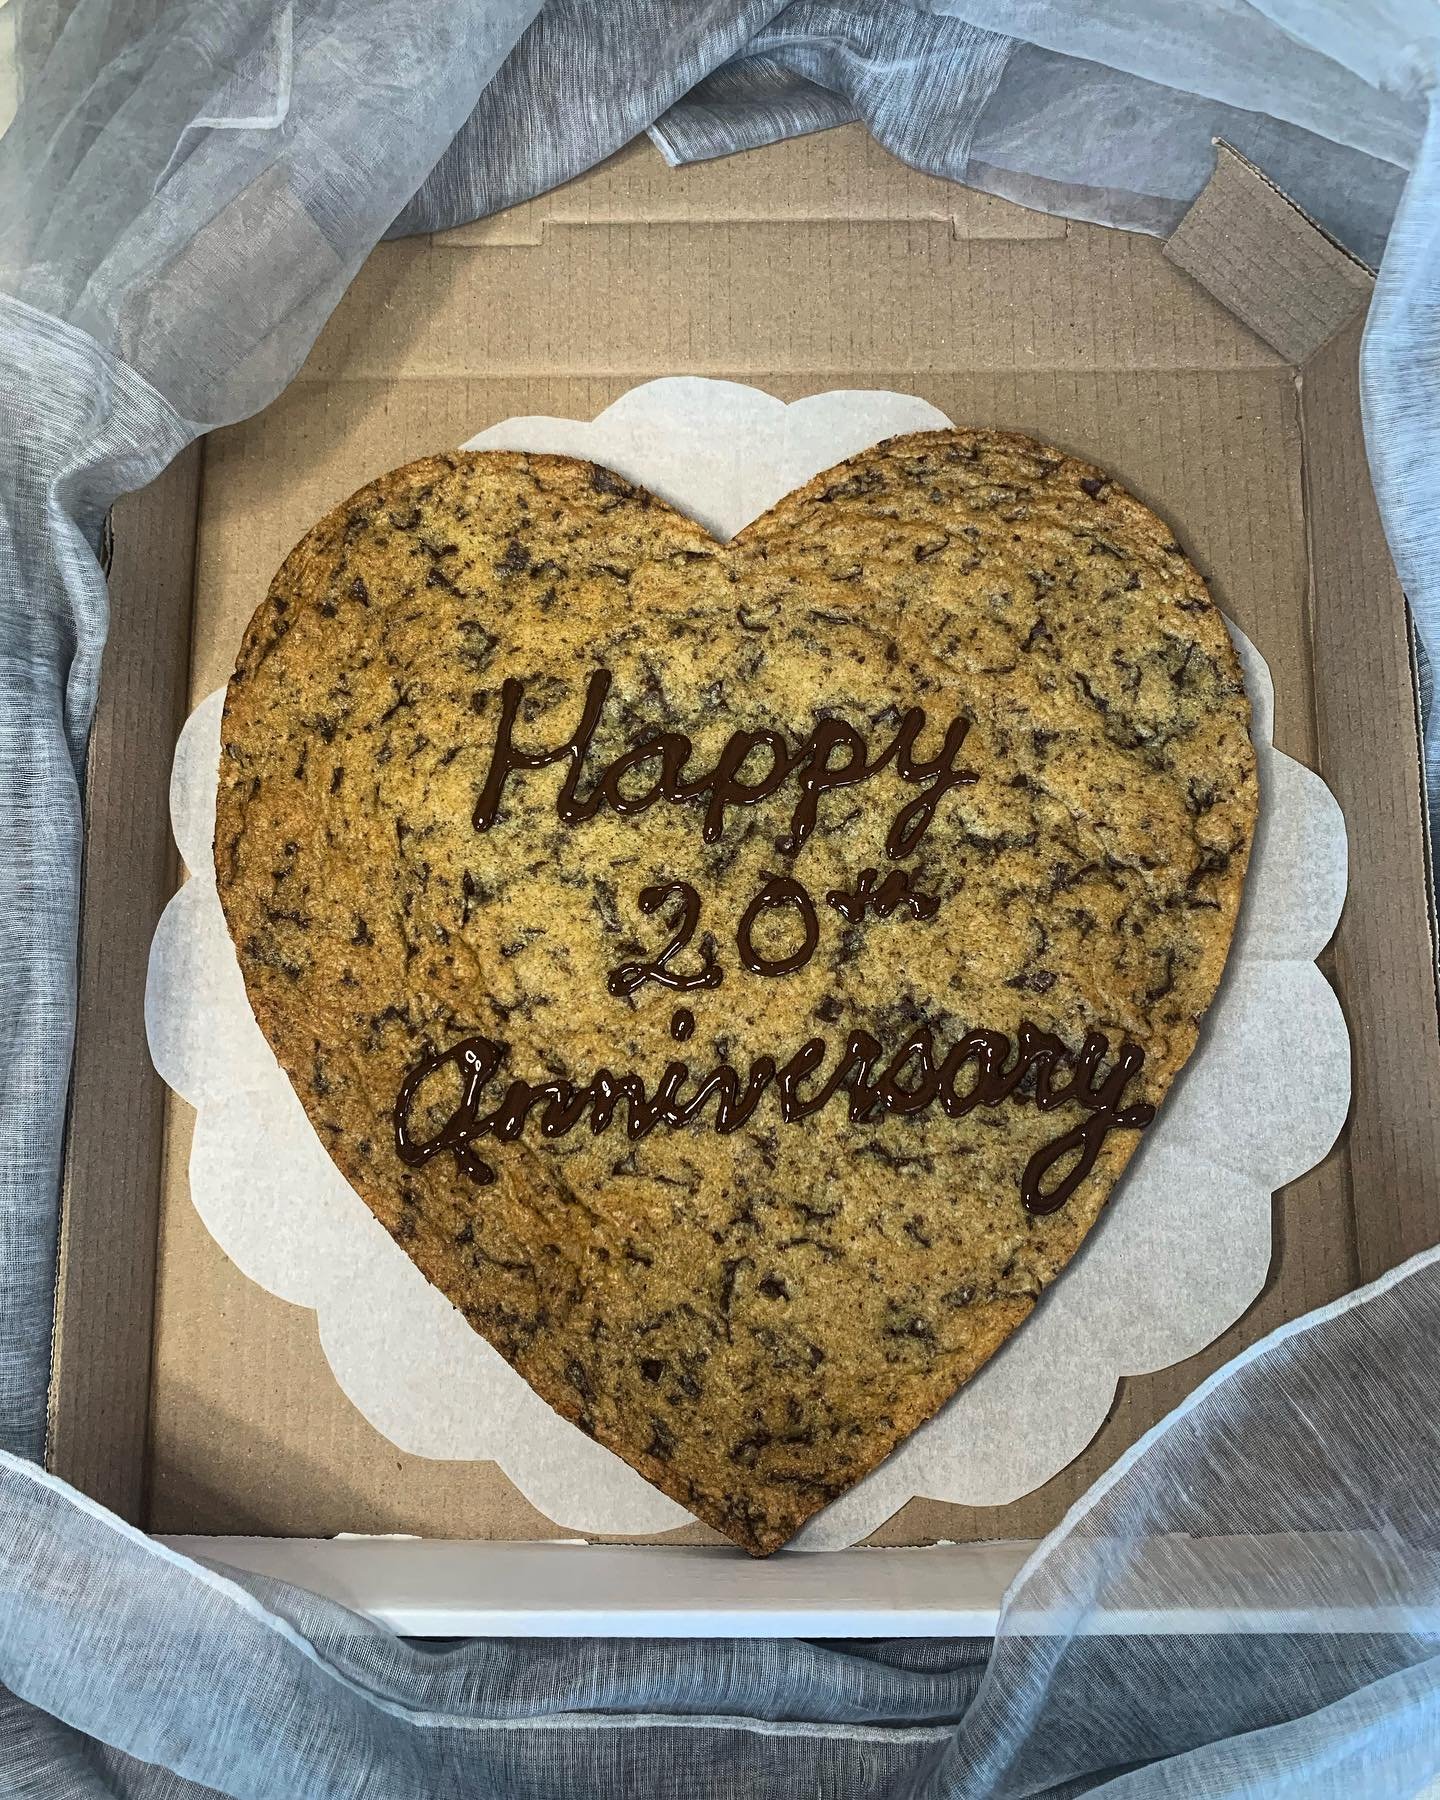 A great gift for someone celebrating an anniversary, birthday, new baby, job, or simply in need of a &ldquo;pick-me-up!&rdquo; 🍪 This cookie is sure to bring a joy! 🤩